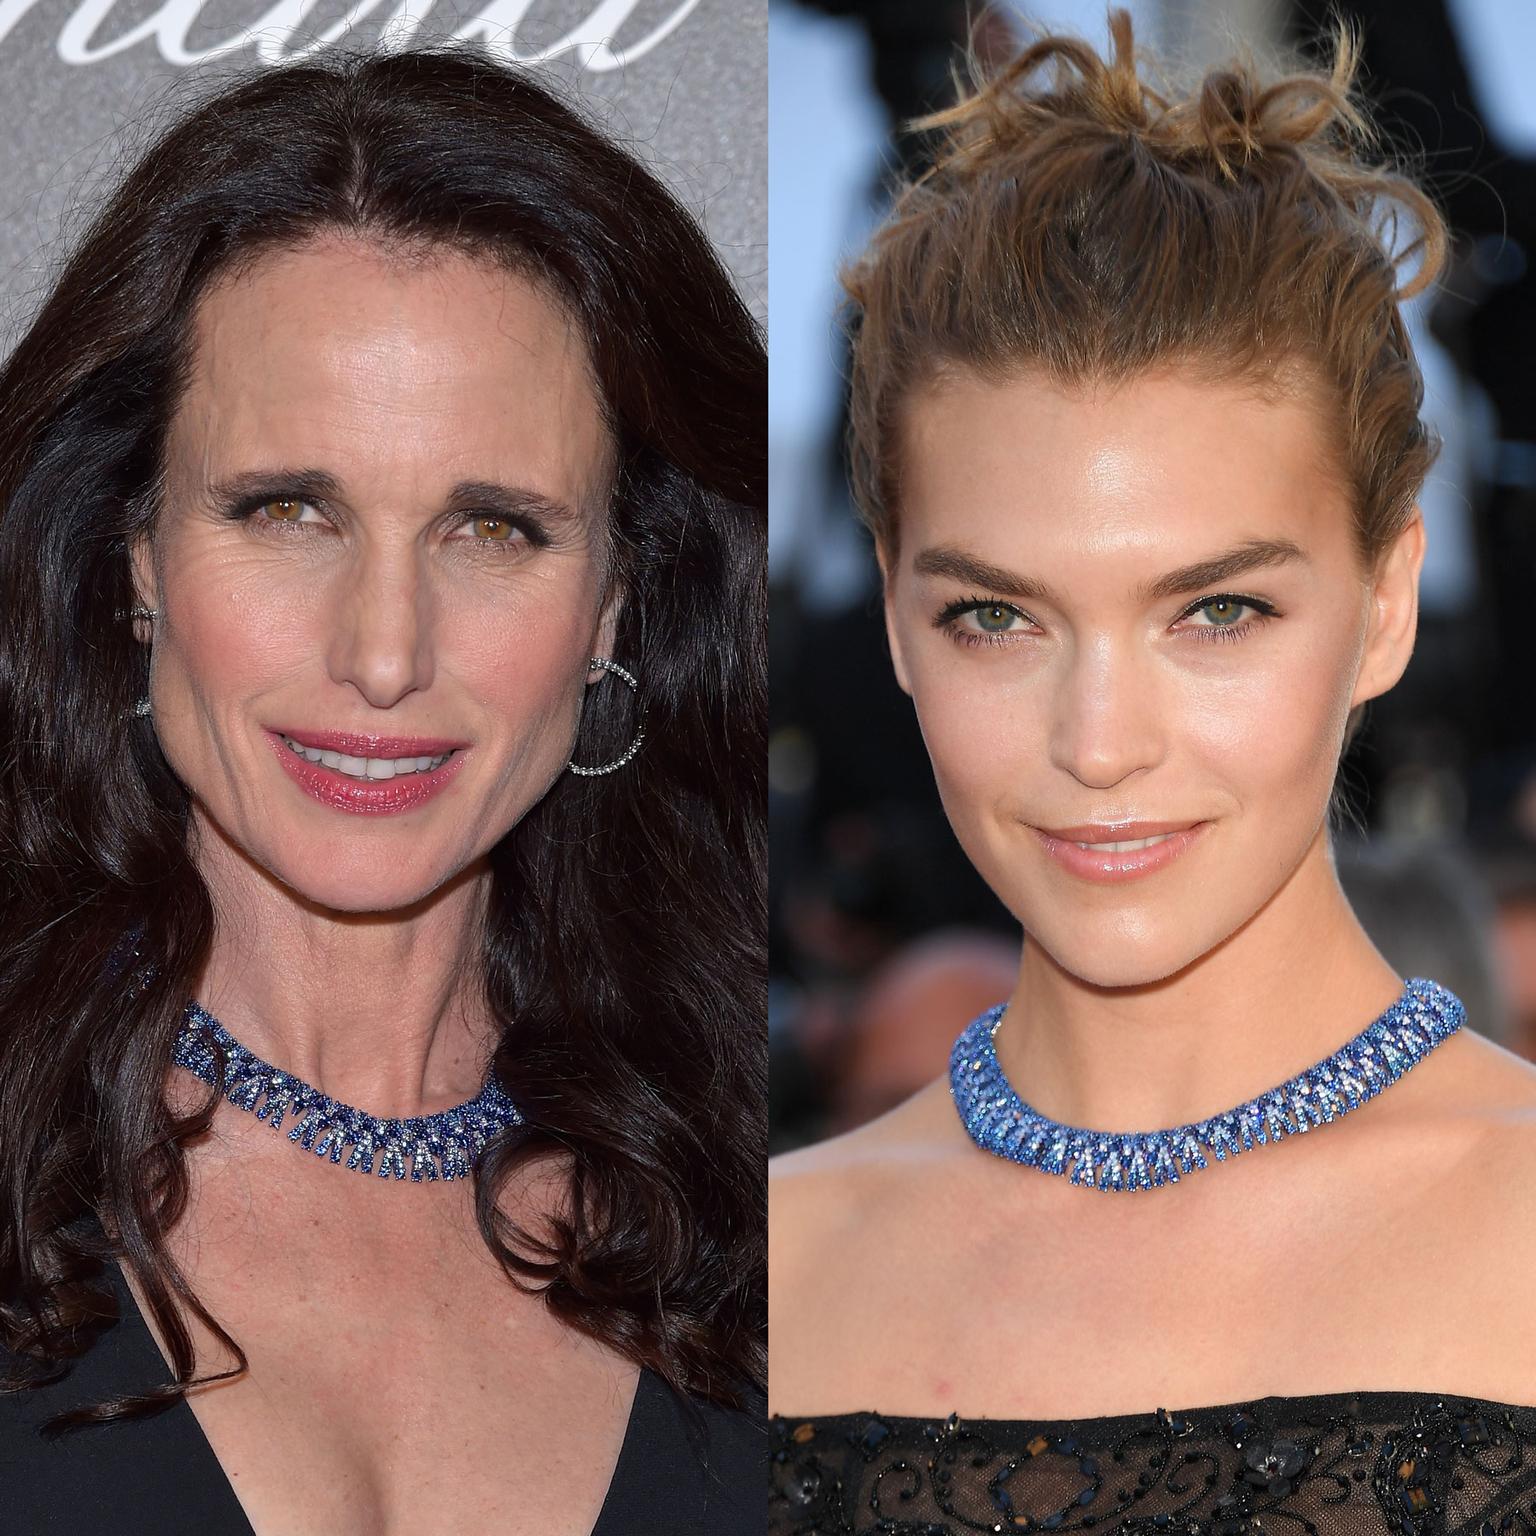 Andie MacDowell and Arizona Muse wear the same Chopard titanium necklace at the Cannes Film Festival